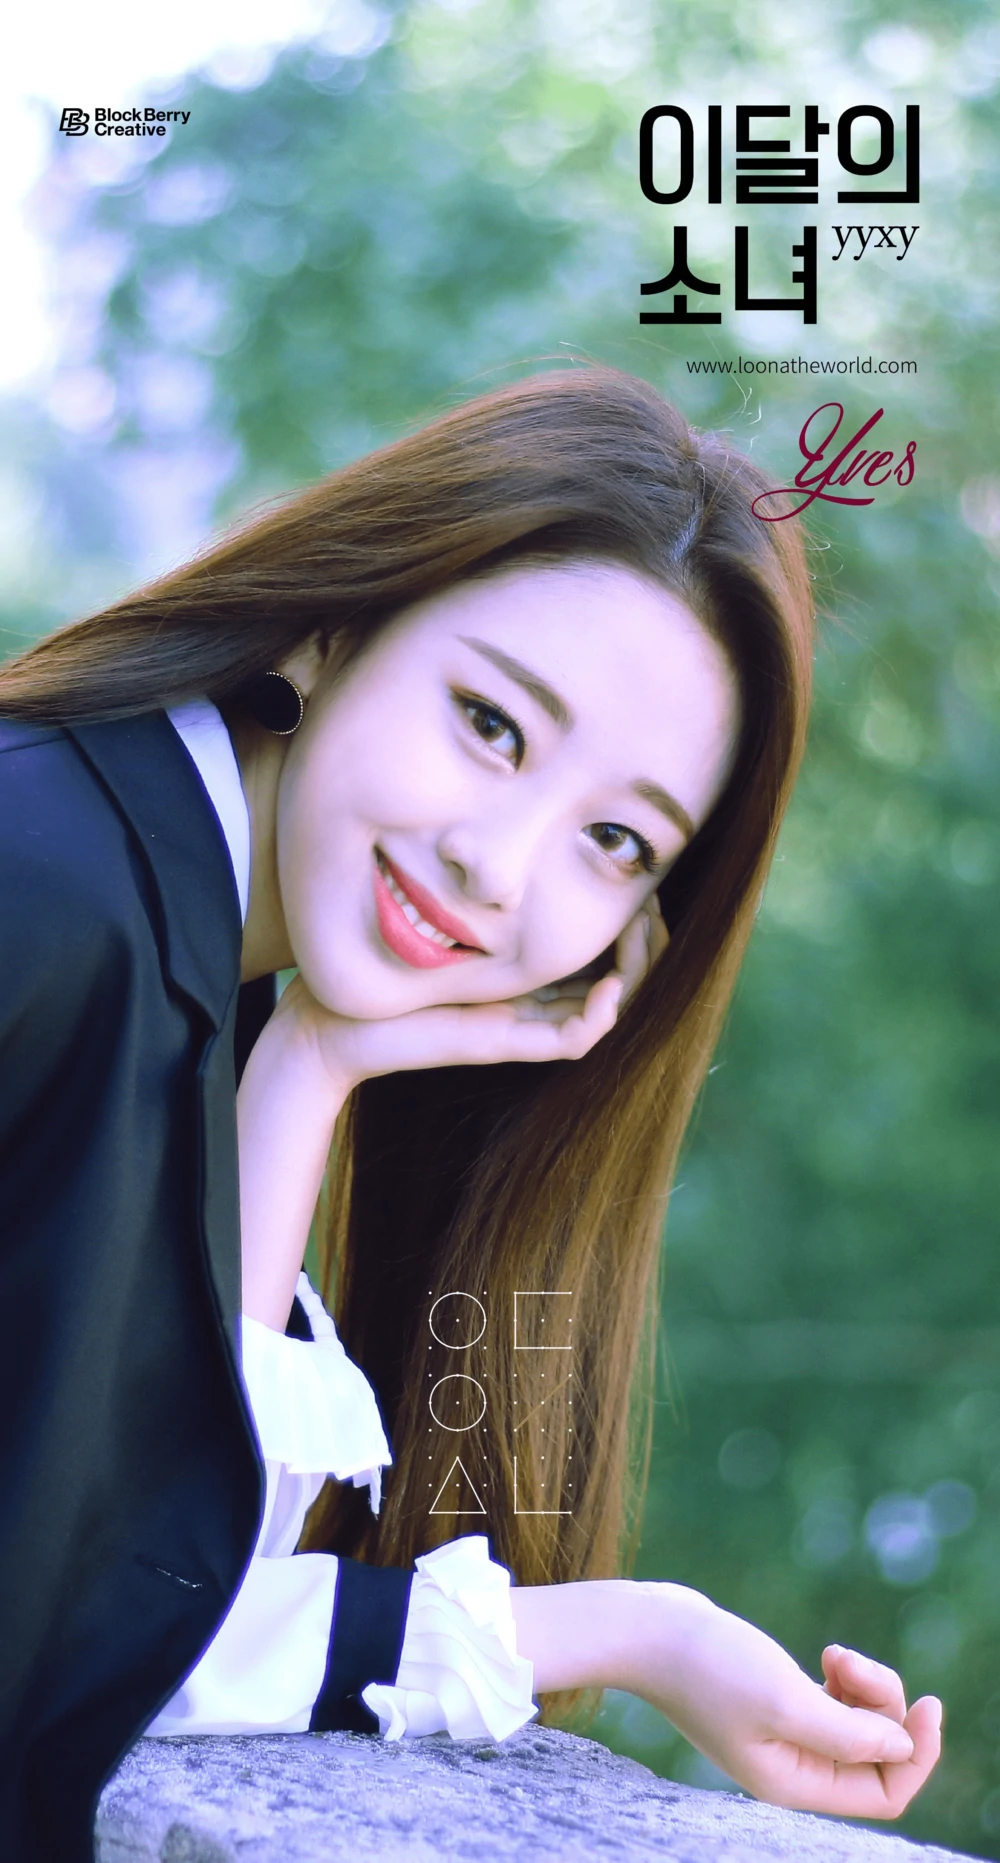 Loona yyxy Beauty & the Beat Yves Concept Teaser Picture Image Photo Kpop K-Concept 1